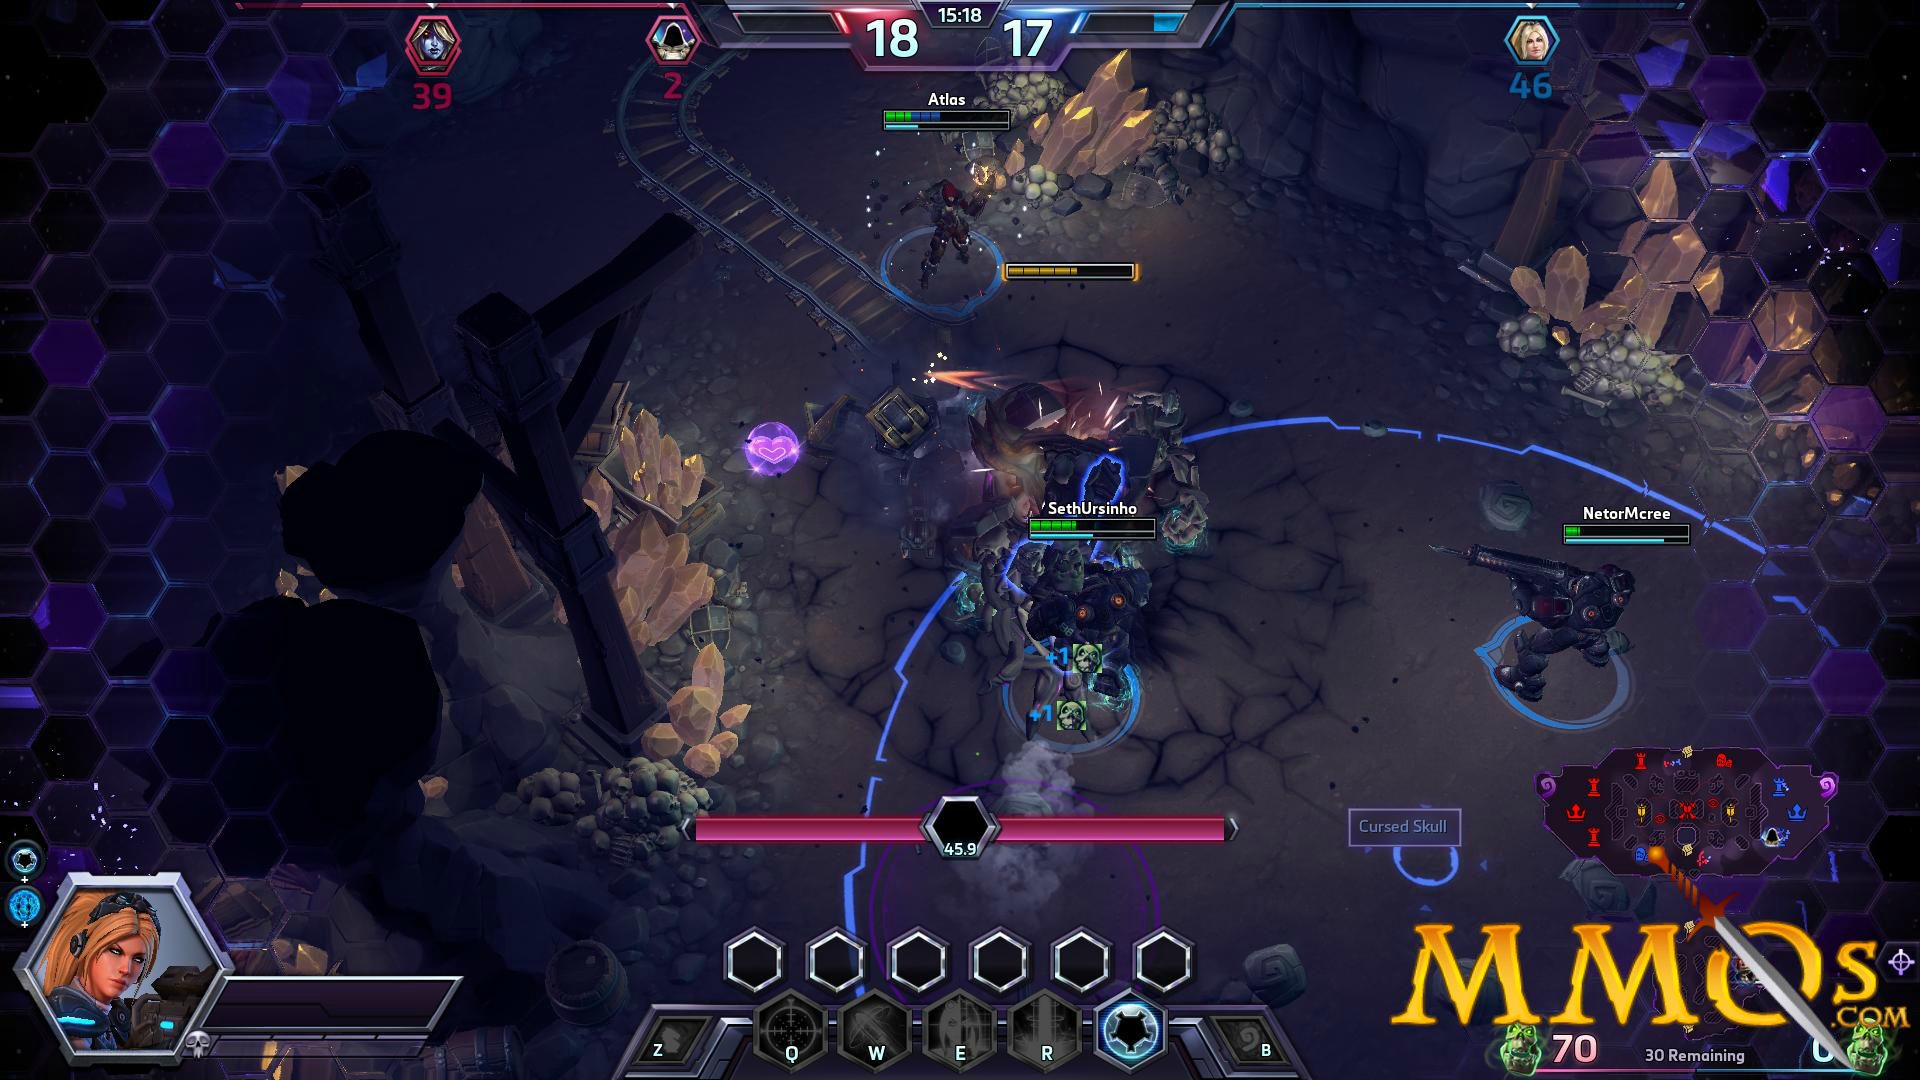 Review: Heroes of the Storm